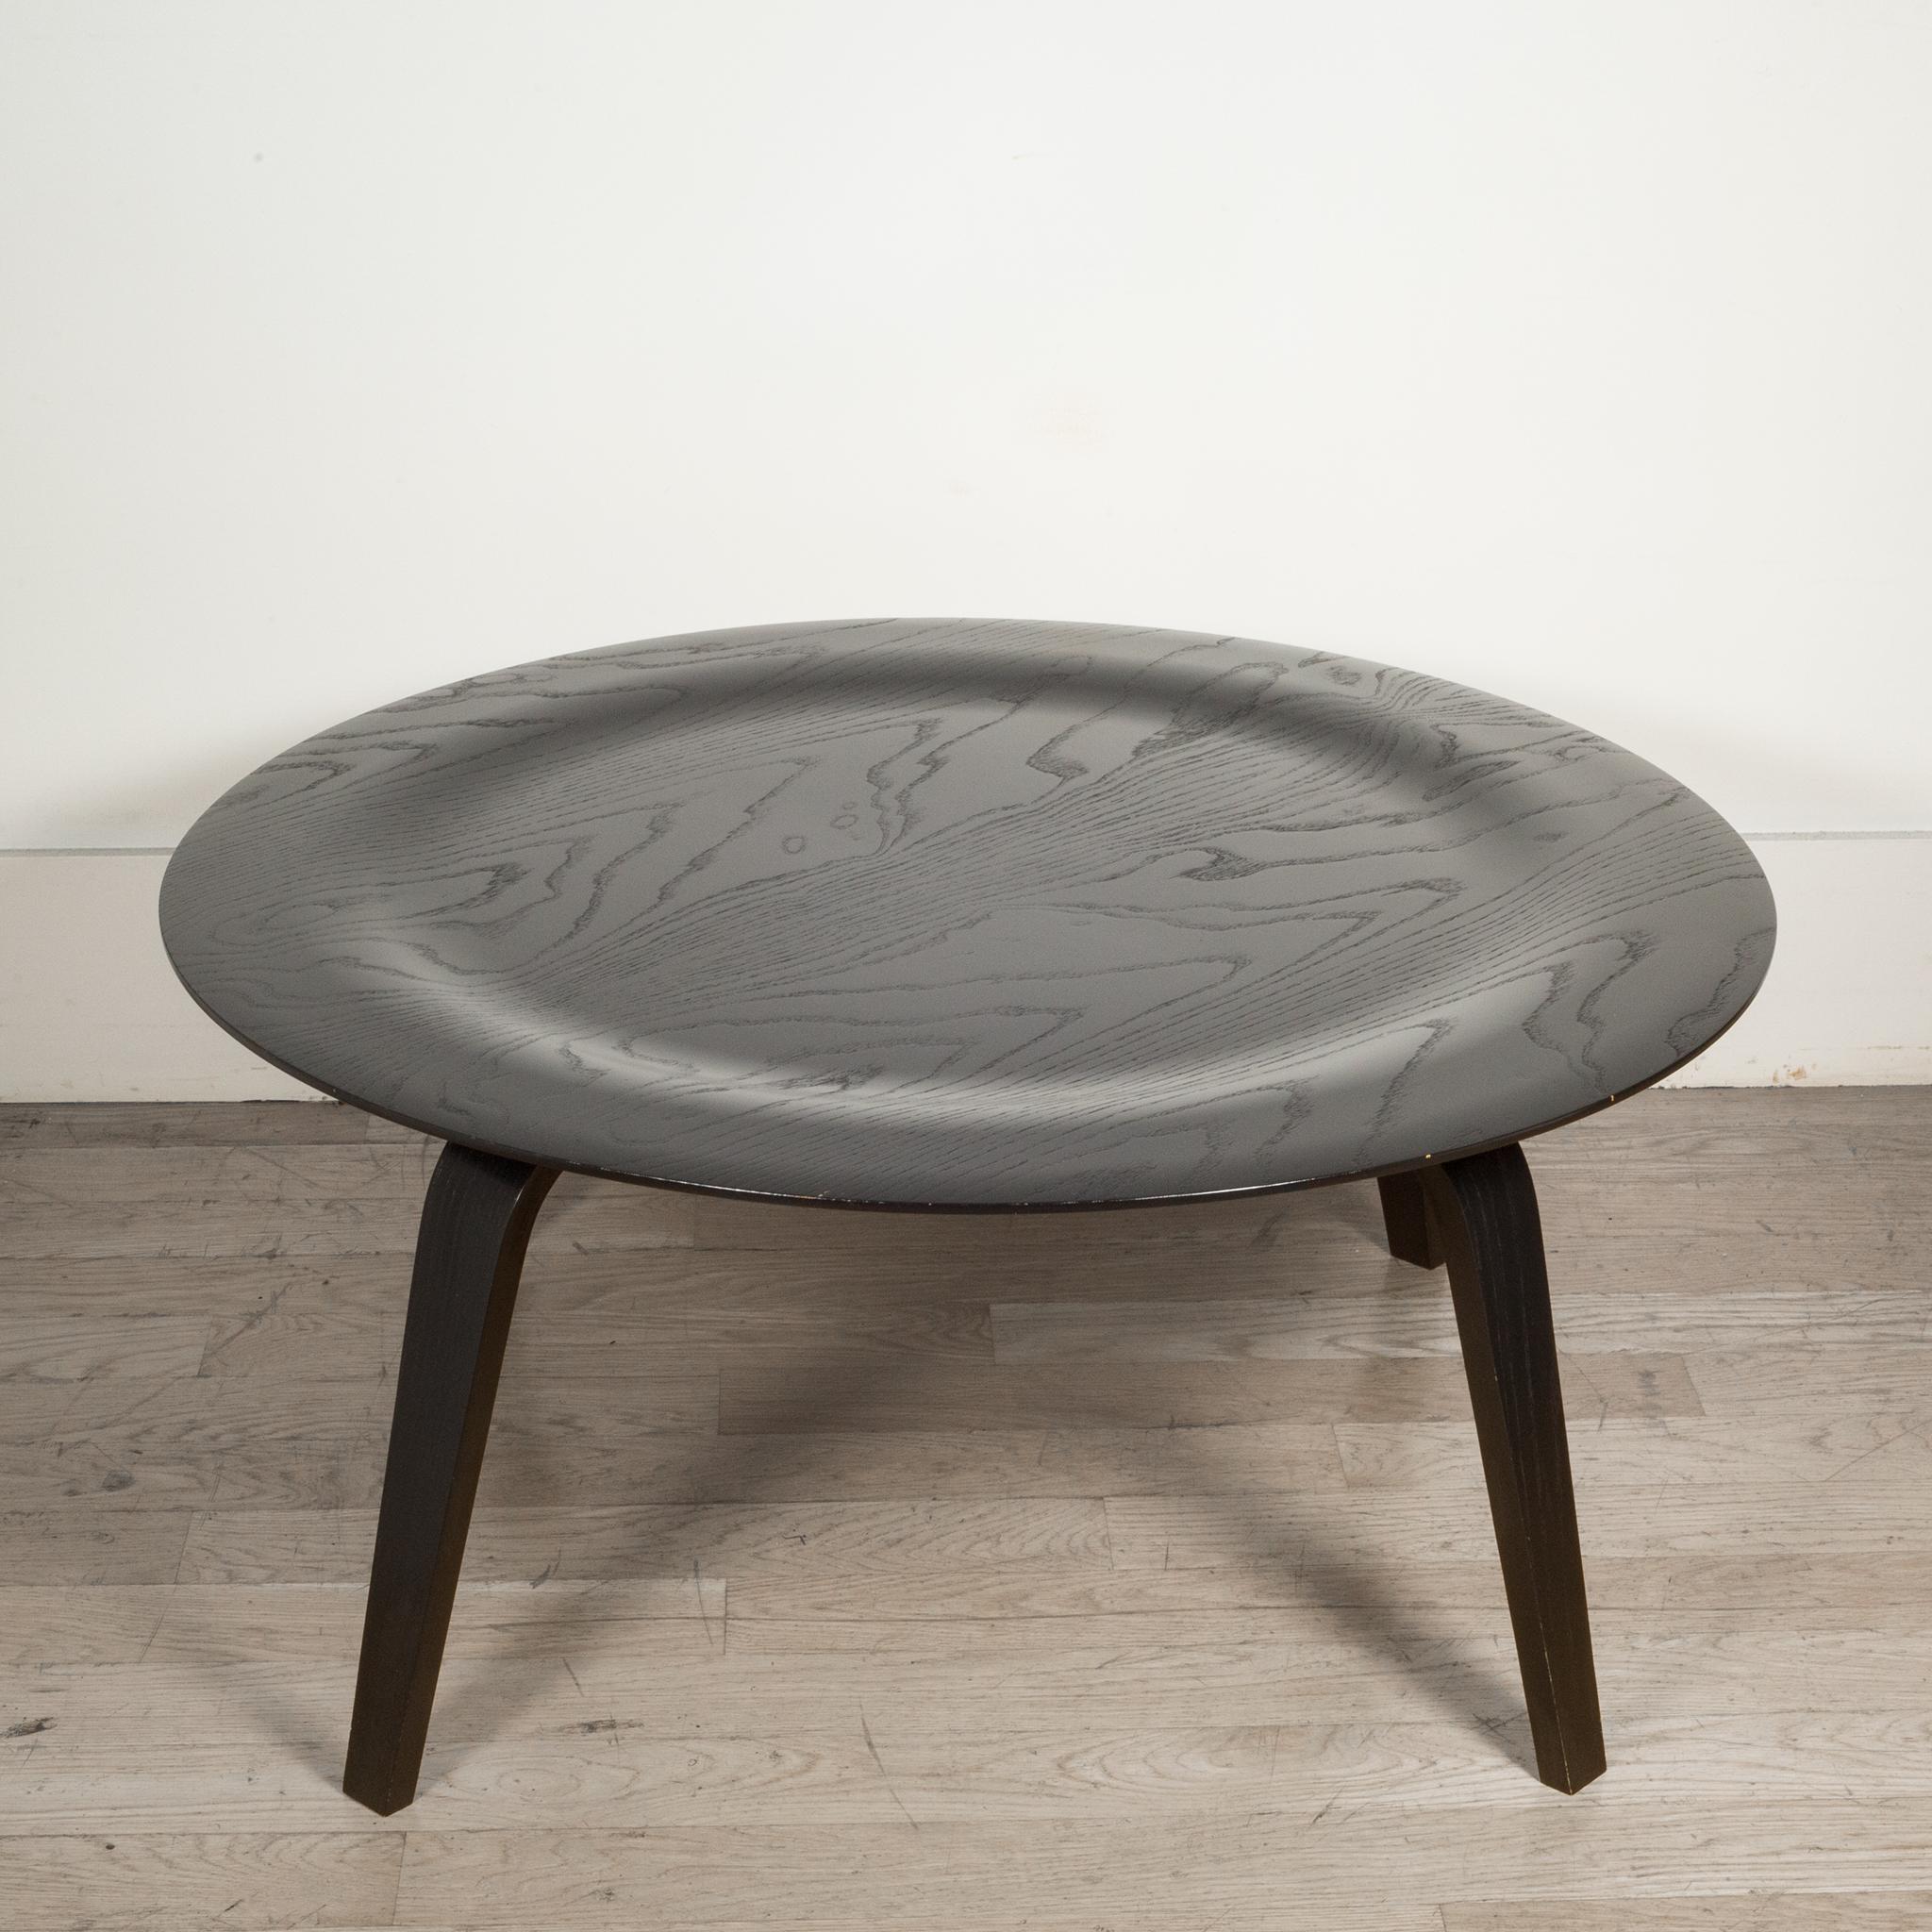 About

An Eames molded plywood coffee table in black. 

Creator Charles & Ray Eames for Herman Miller.
Date of manufacture c.2010.
Materials and techniques molded plywood.
Condition good. Wear consistent with age and use. Minor wear around